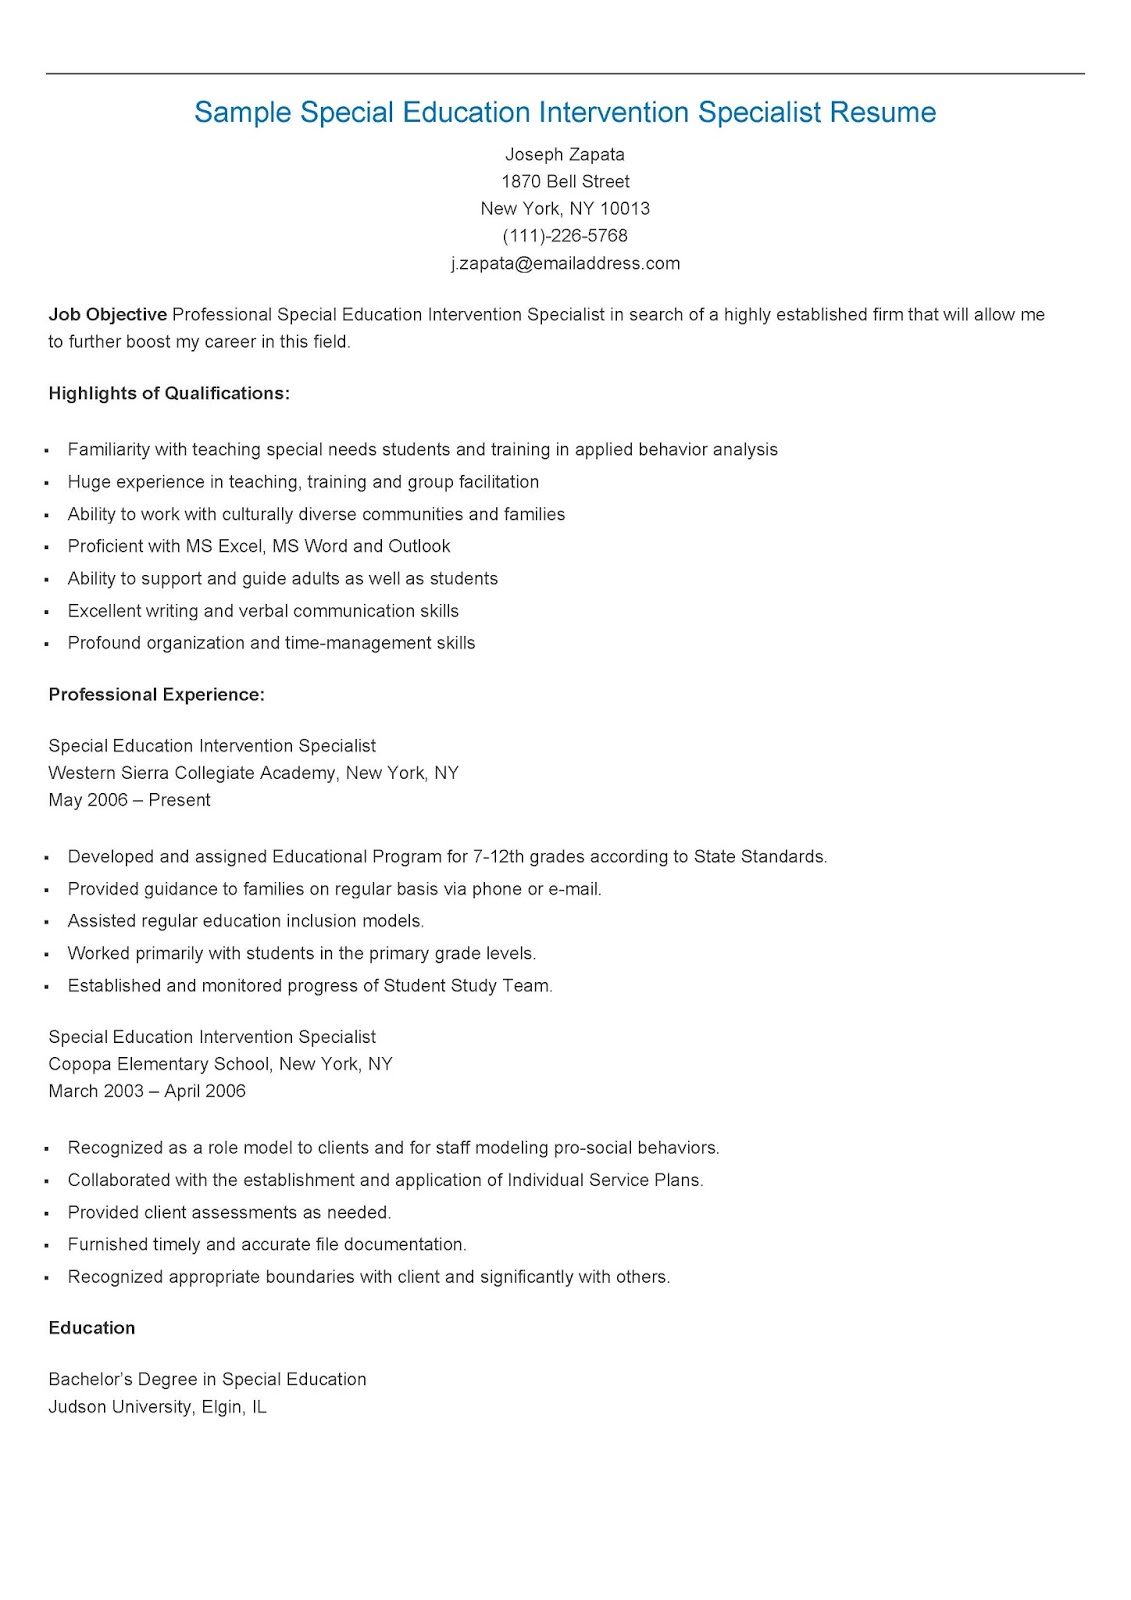 Resume Samples Sample Special Education Intervention